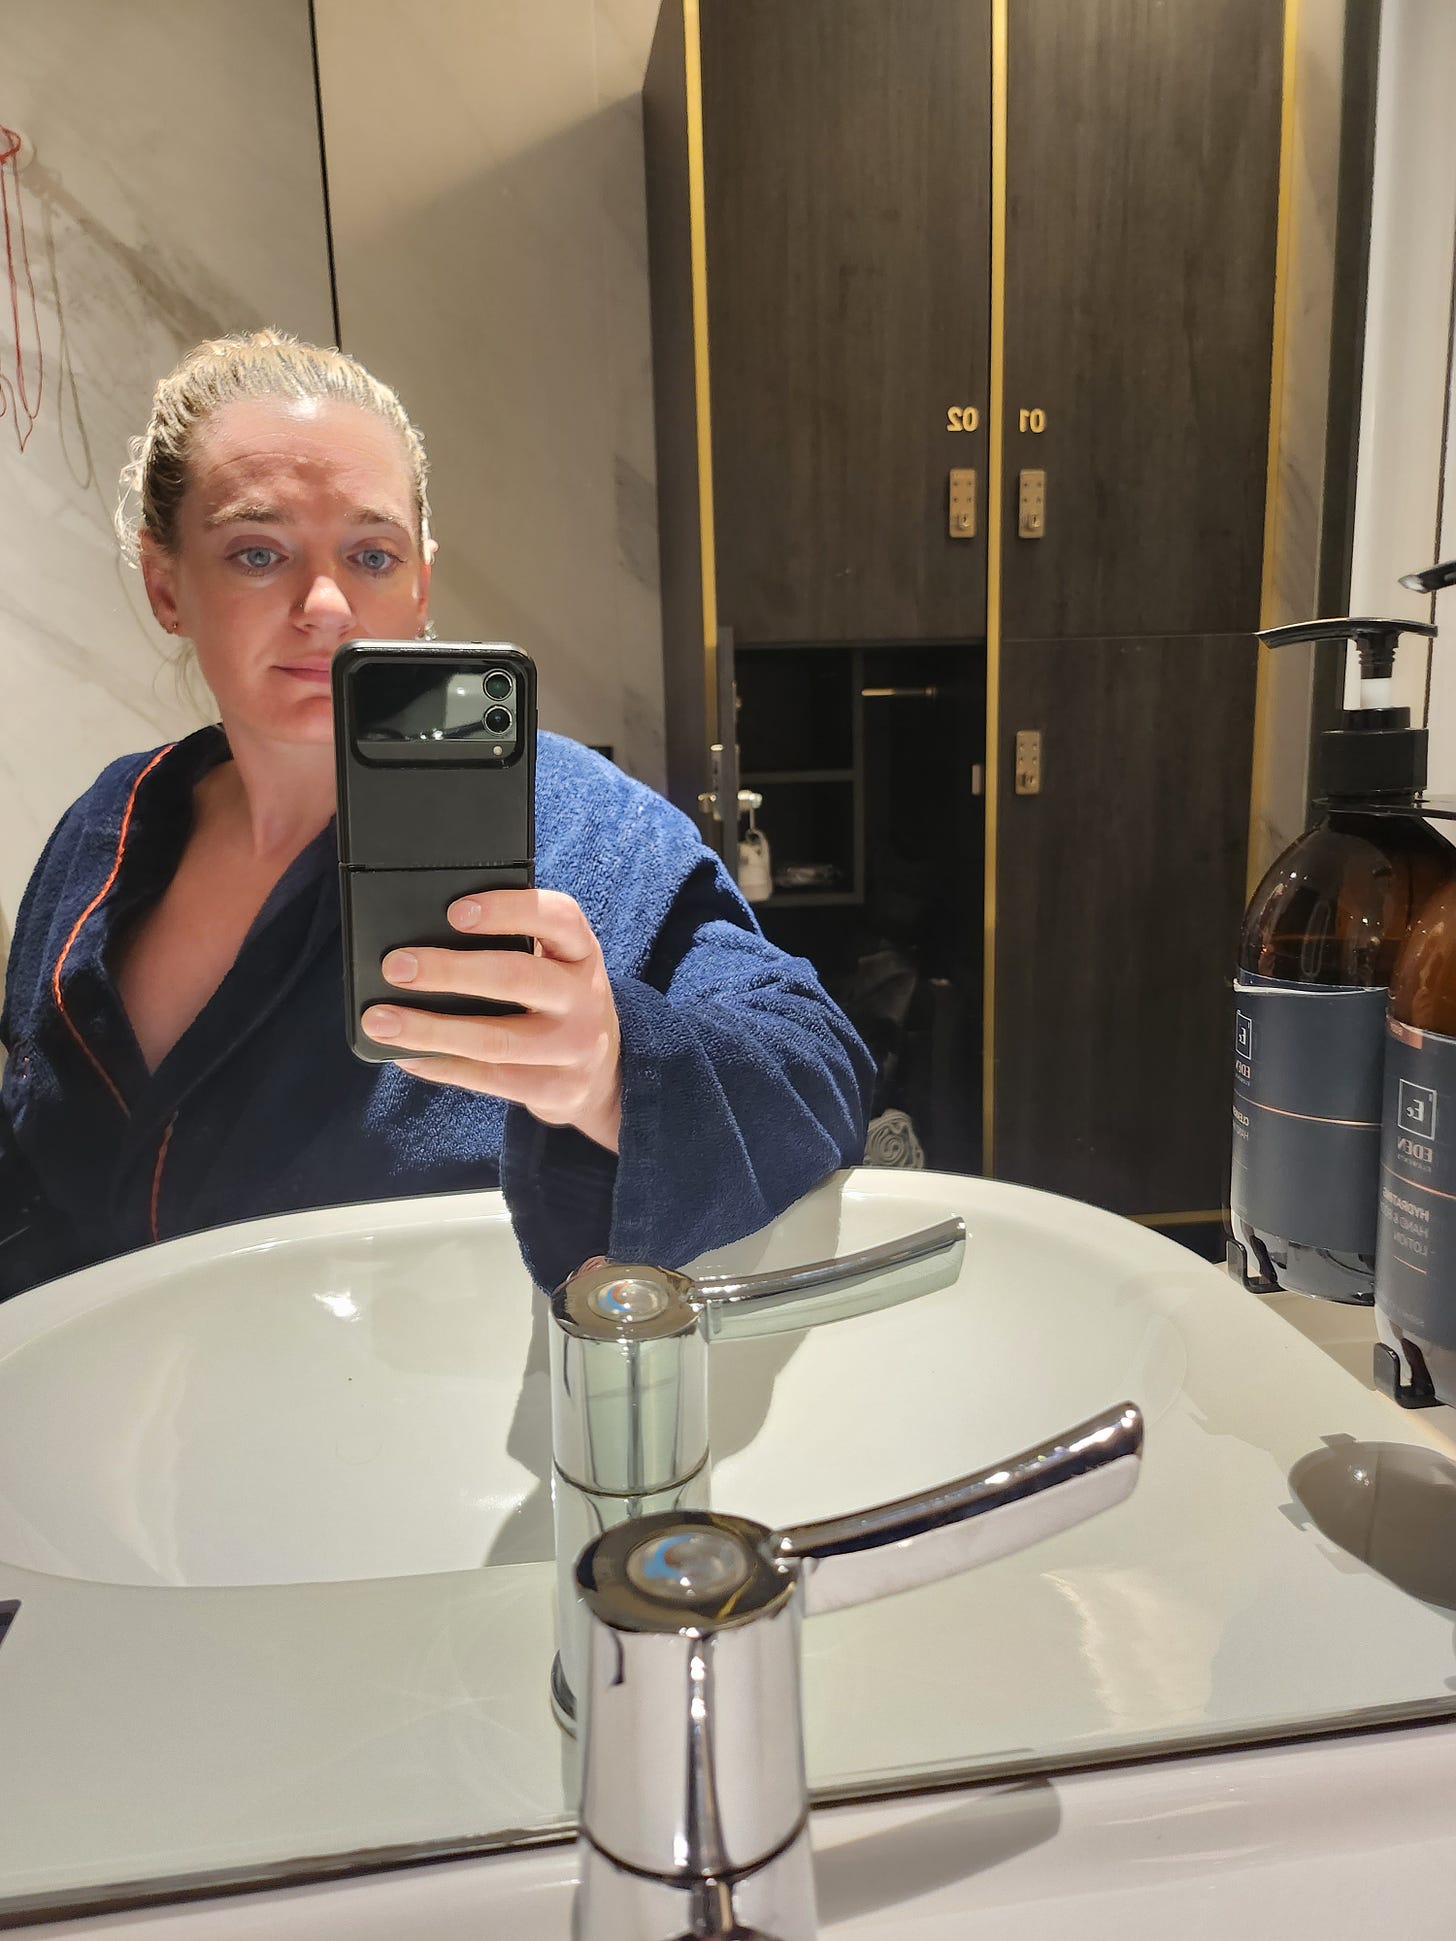 I take a selfie in a bathroom mirror. Wearing a navy robe with gold lining, this is Eden One. The branding can be seen on the labels of the soap bottles in the mirror. Lockers are behind me. 